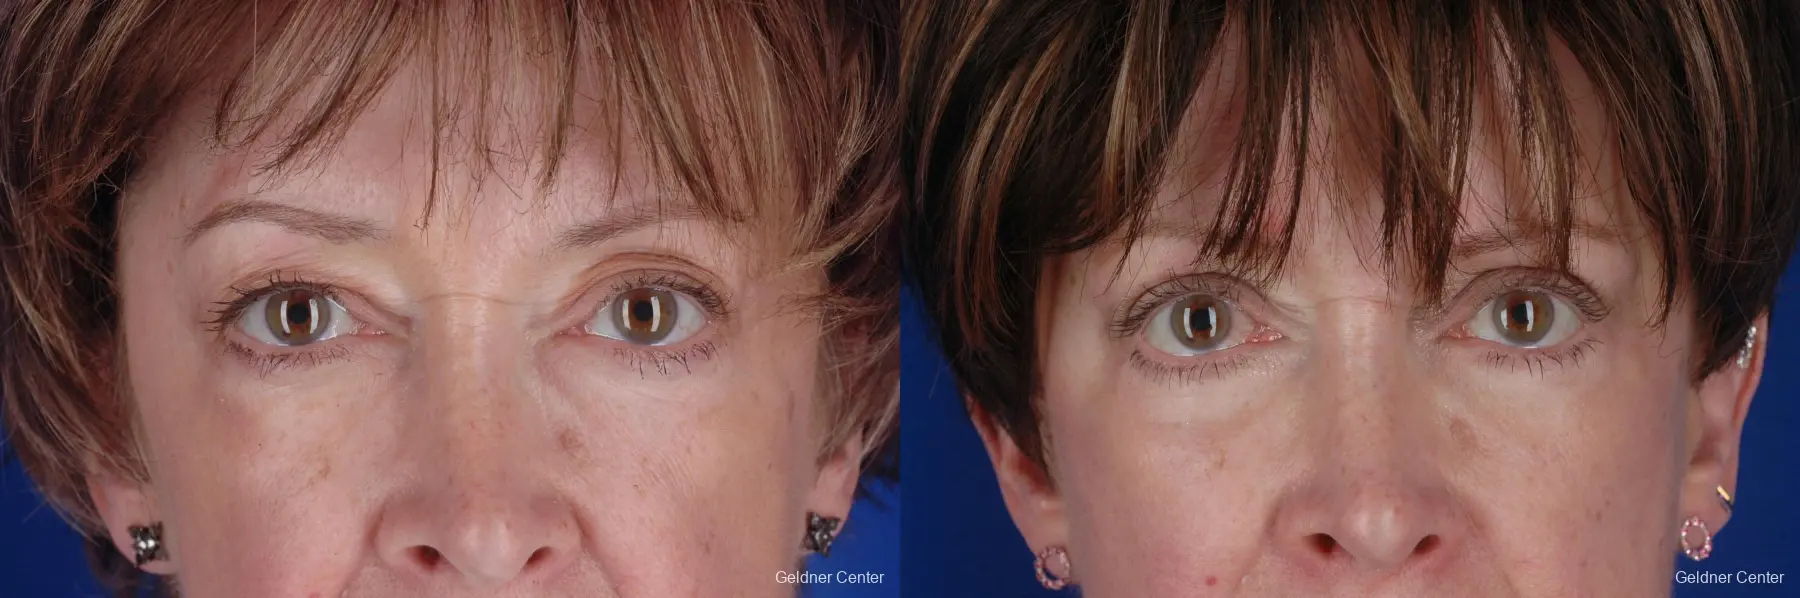 59 year old woman, upper and lower lid blepharoplasty - Before and After 1